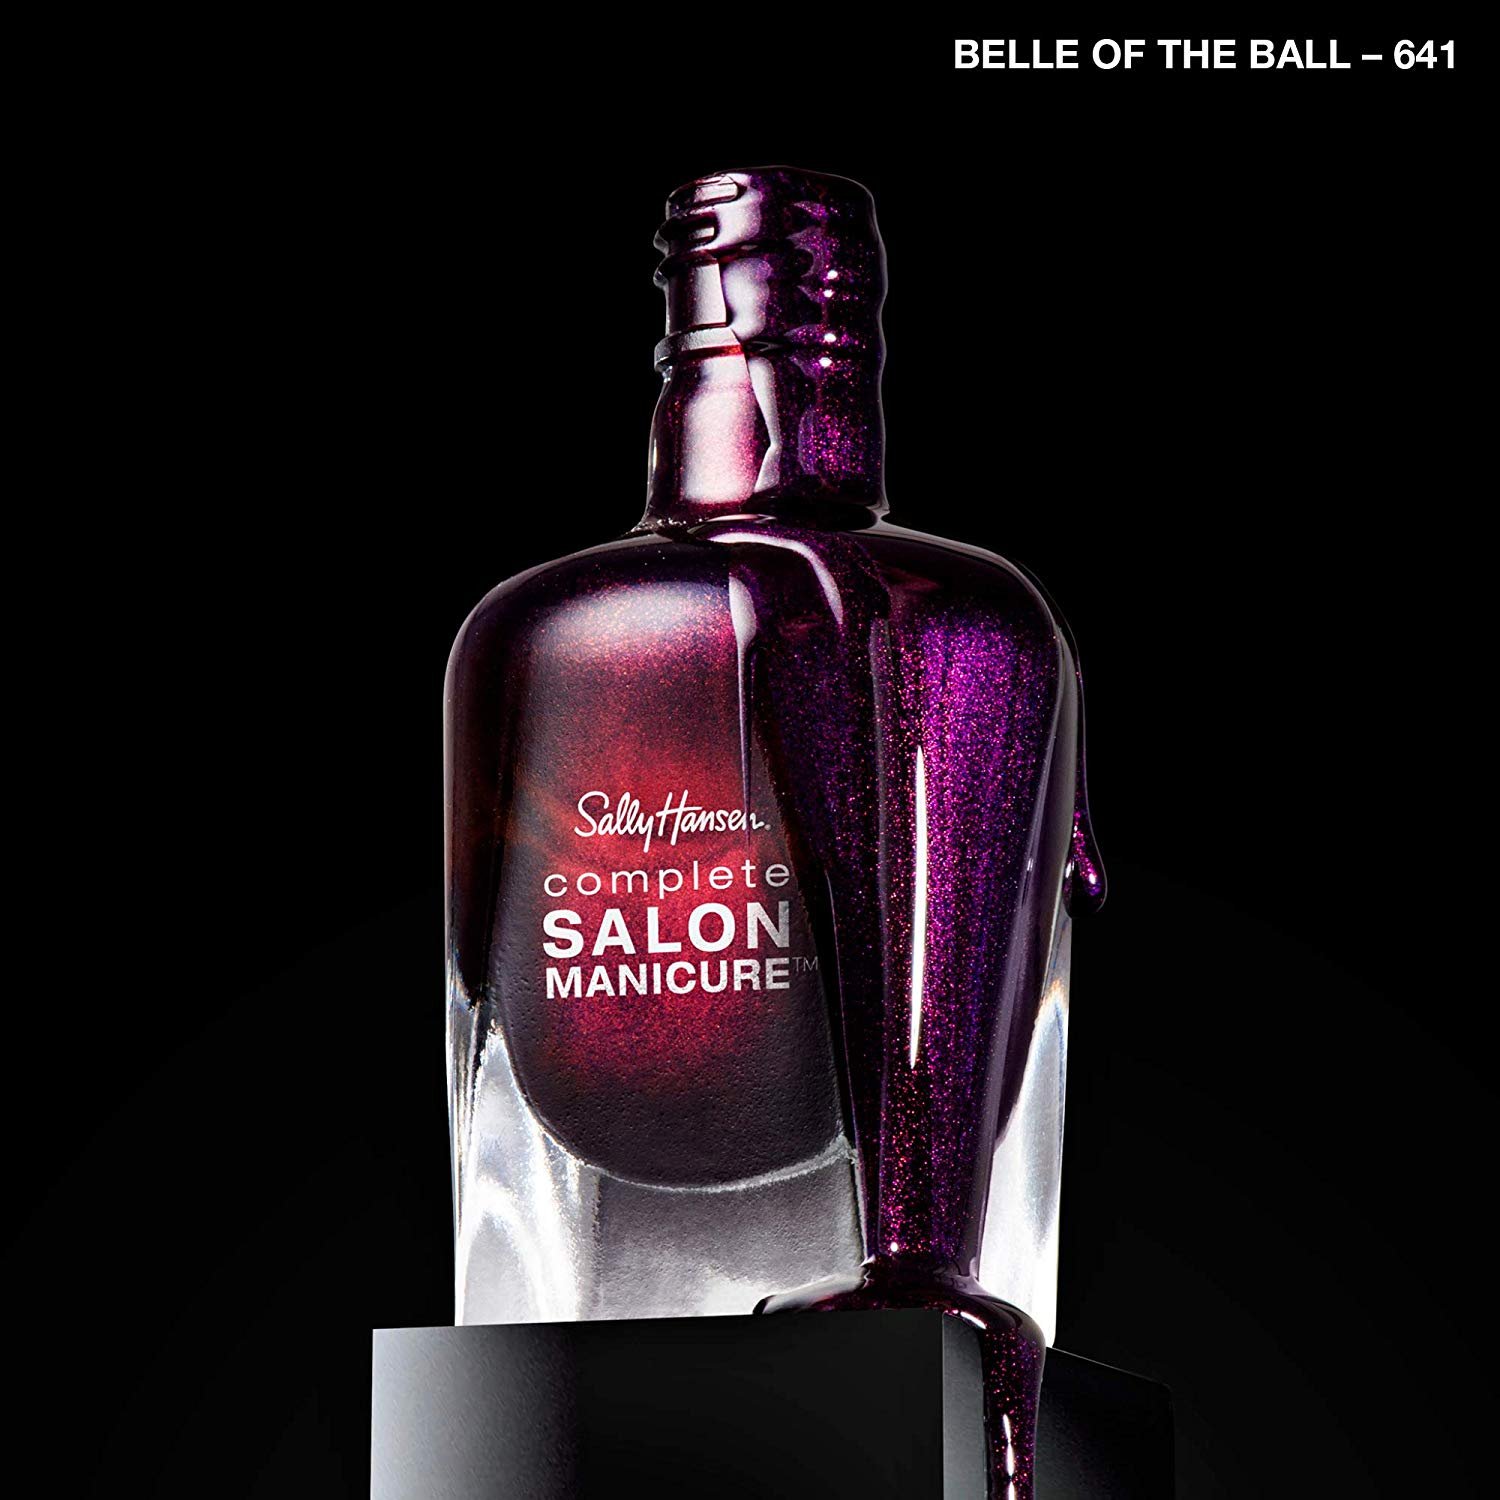 Sally Hansen Complete Salon Manicure Nail Polish, Belle of the Ball - image 3 of 8